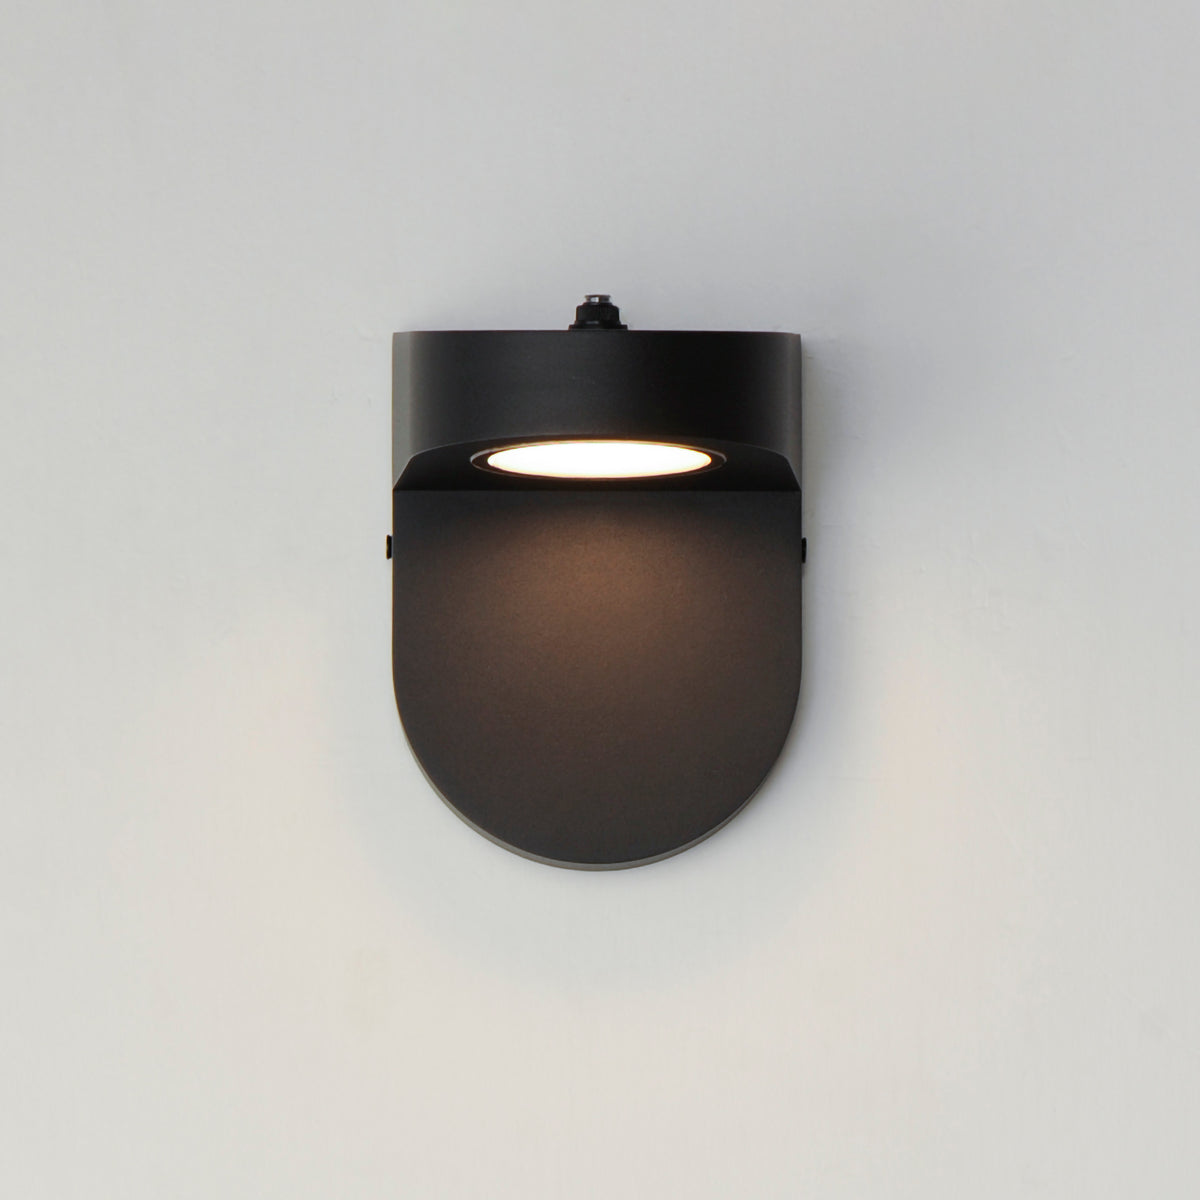 Ledge LED Outdoor Wall Sconce W/ Photocell